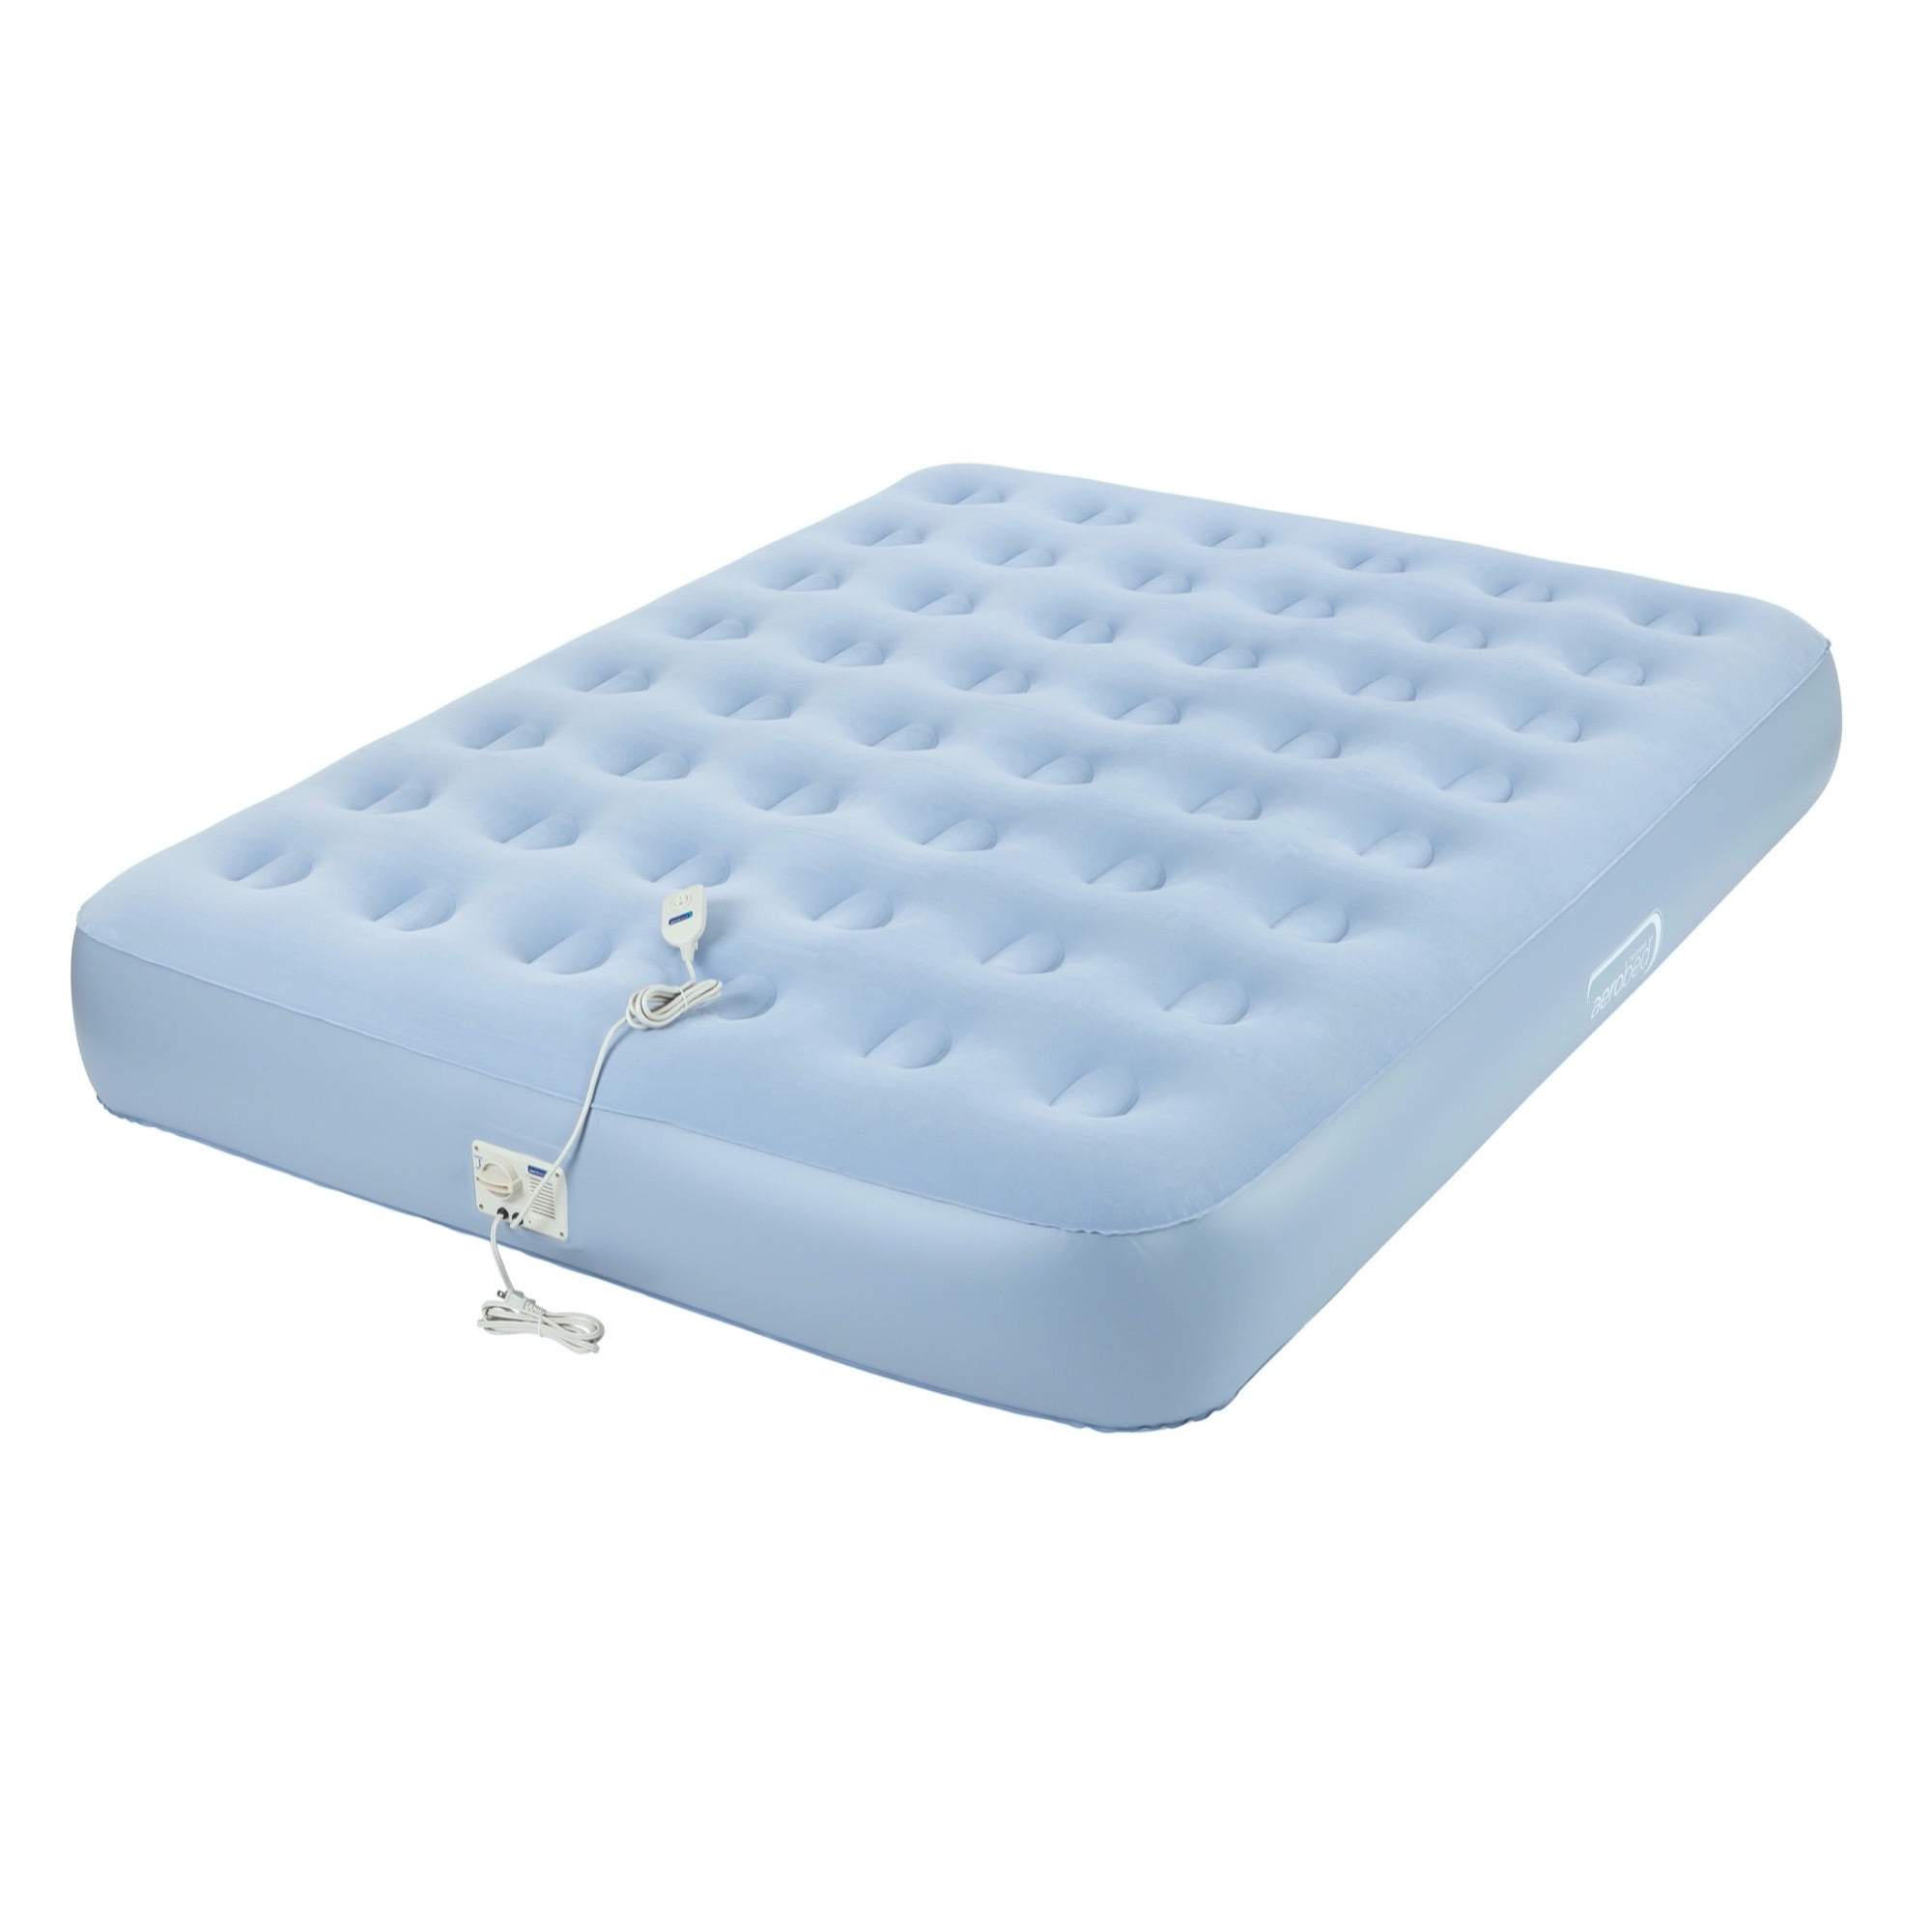 AS SEEN ON TV WITH PUMP-Free Postage-Genuine EUROBED LUXURY QUEEN Original 